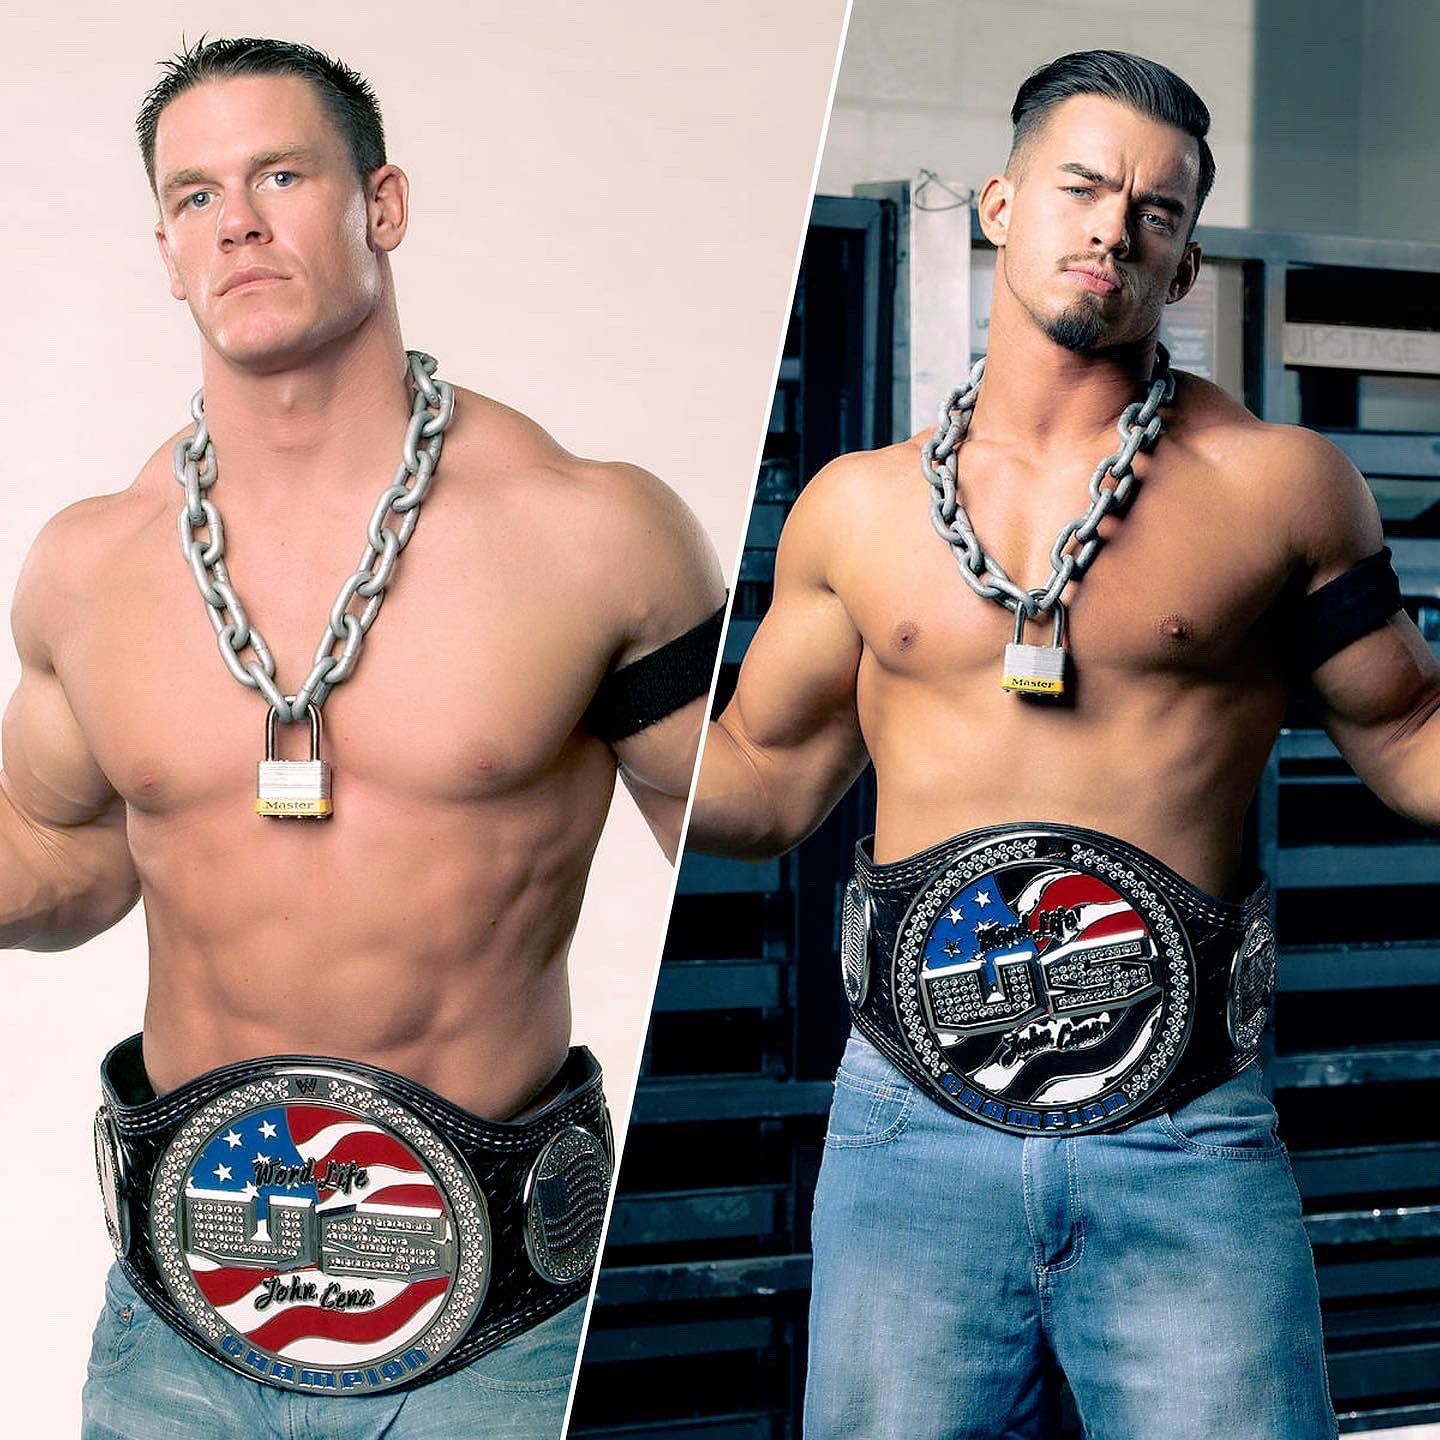 Both stars won the US Championship in the early stages of their WWE careers.